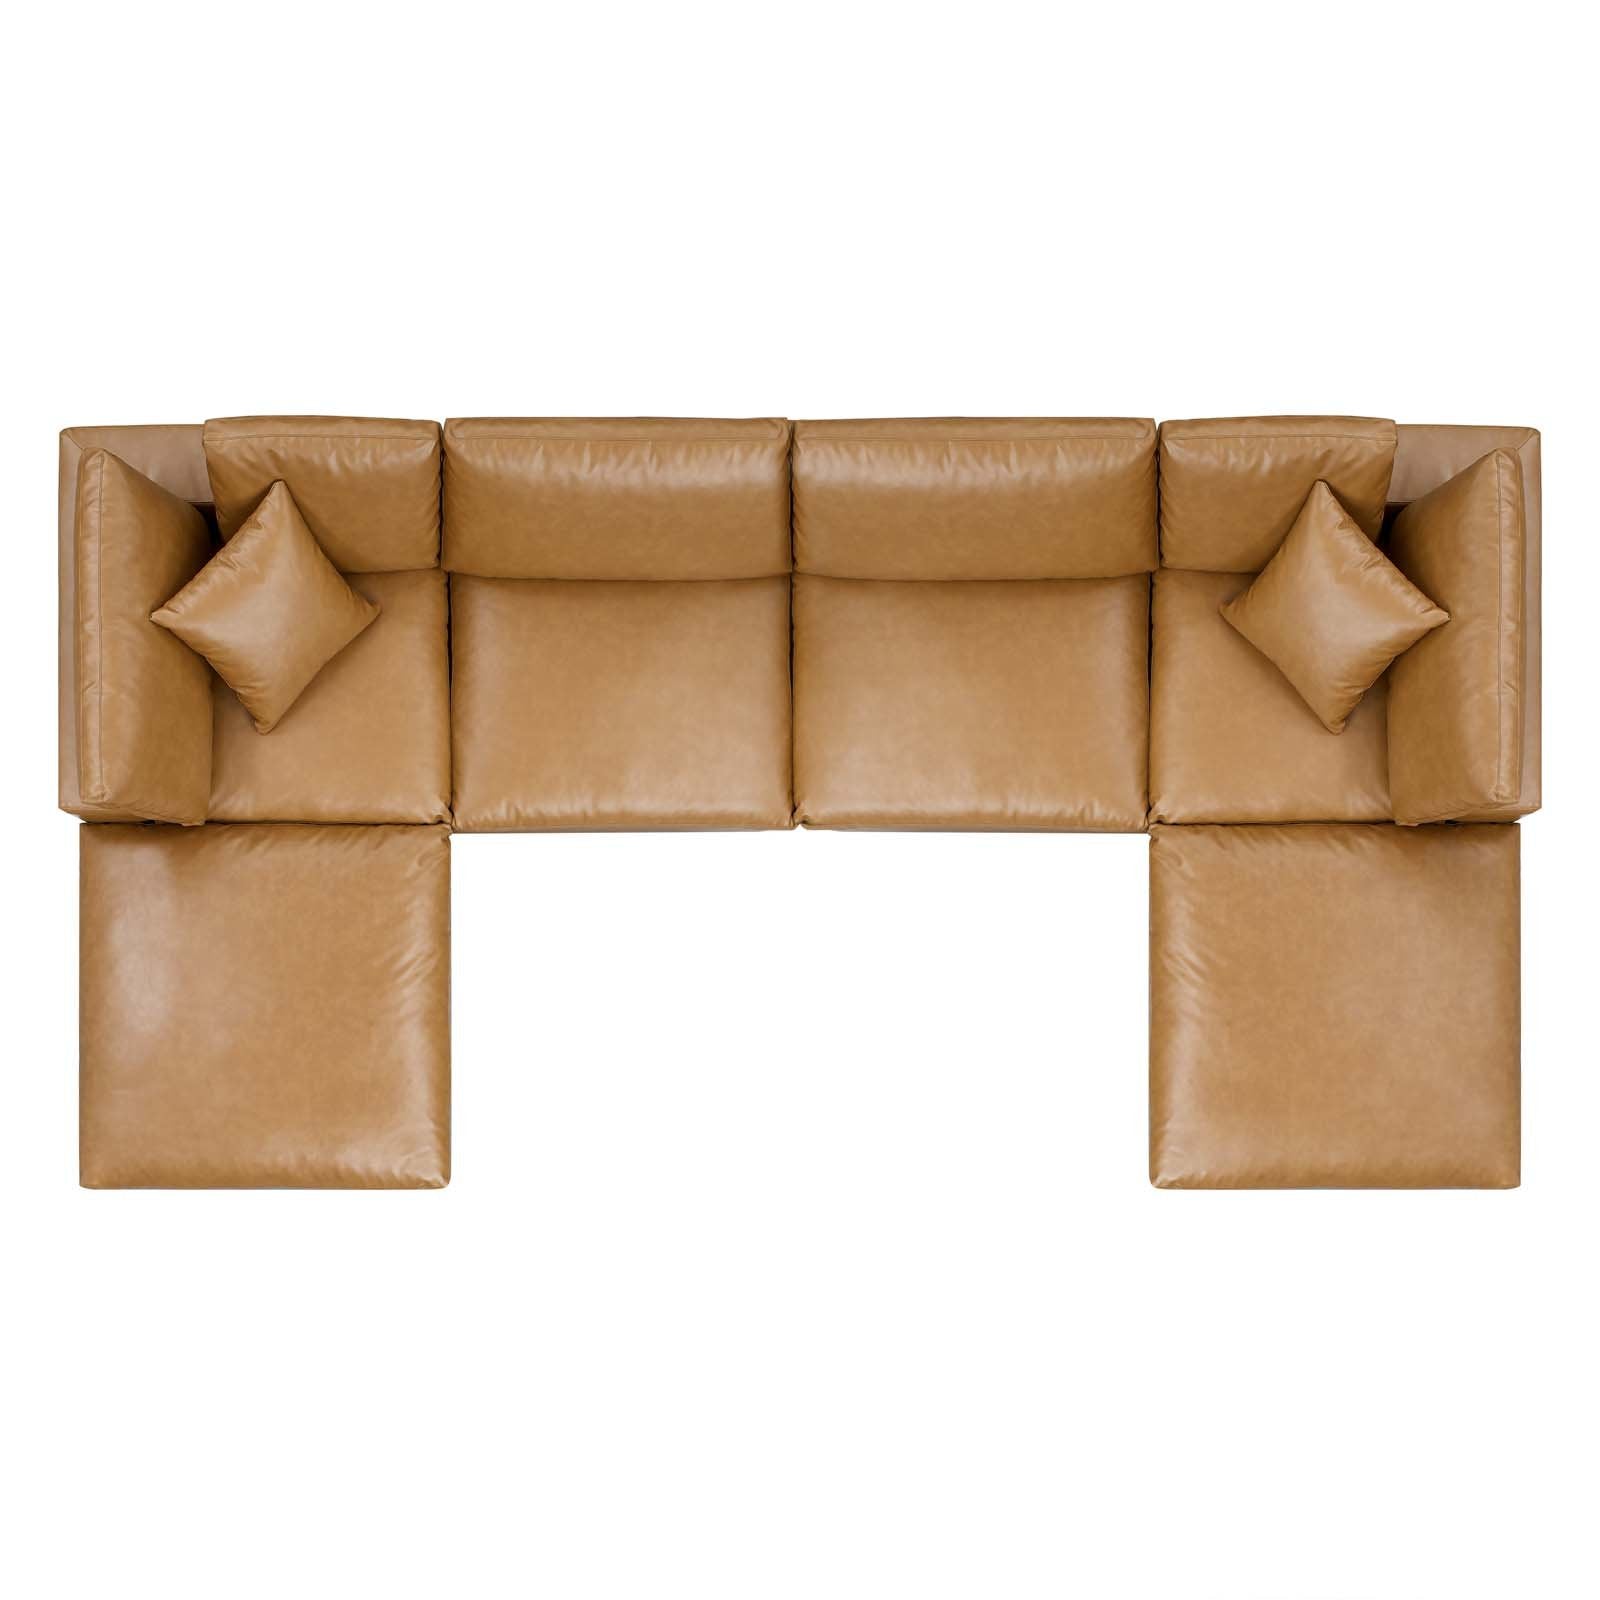 Commix Down Filled Overstuffed Vegan Leather 6-Piece Sectional Sofa - East Shore Modern Home Furnishings